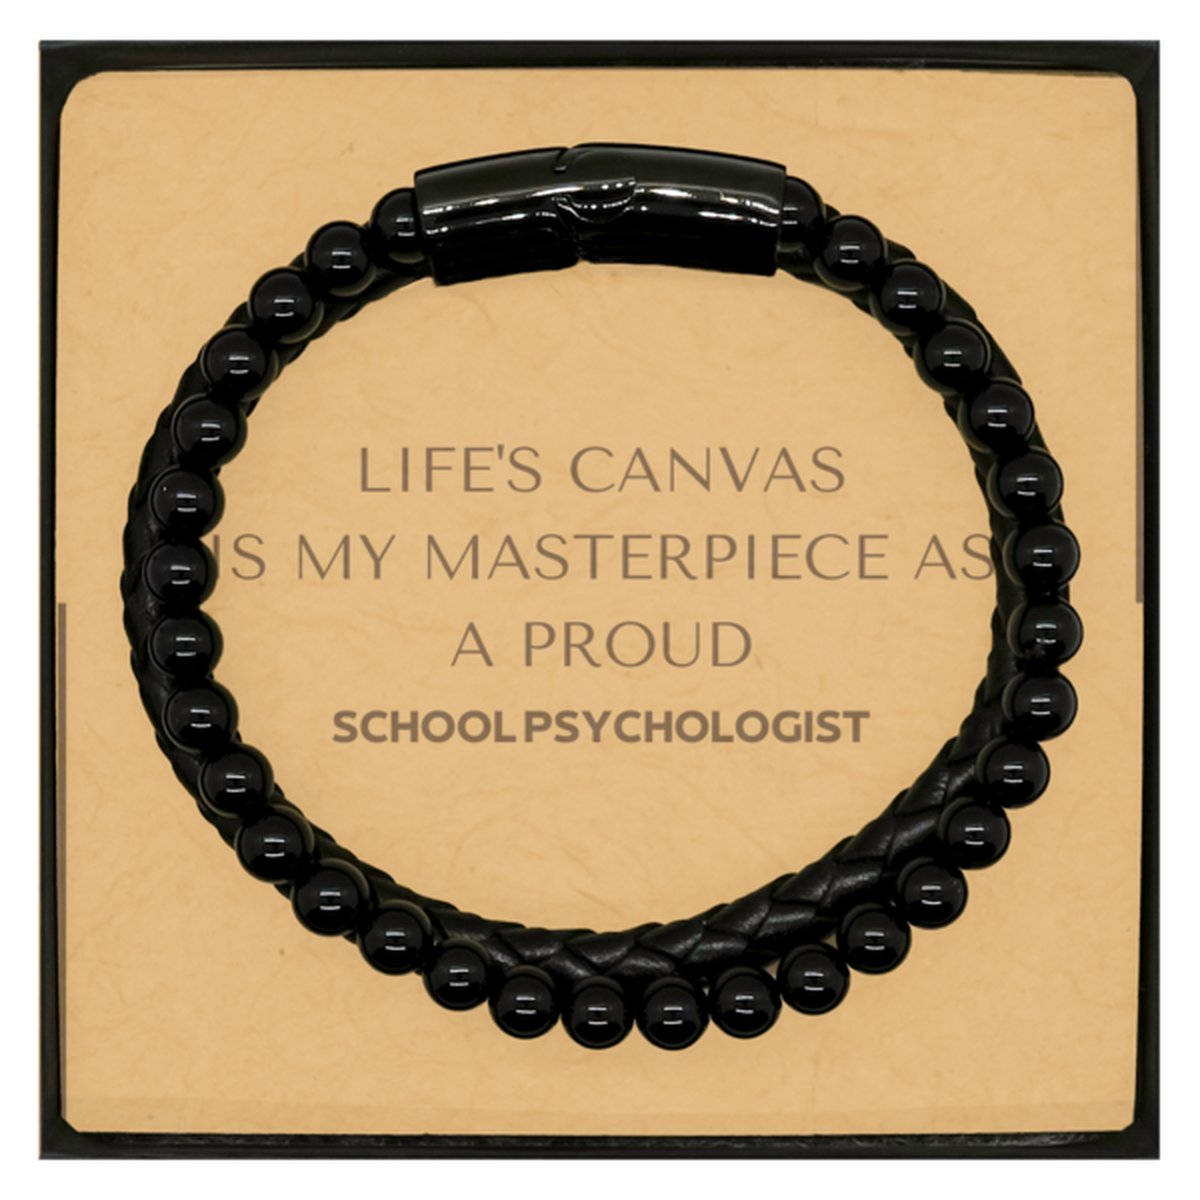 Proud School Psychologist Gifts, Life's canvas is my masterpiece, Epic Birthday Christmas Unique Stone Leather Bracelets For School Psychologist, Coworkers, Men, Women, Friends